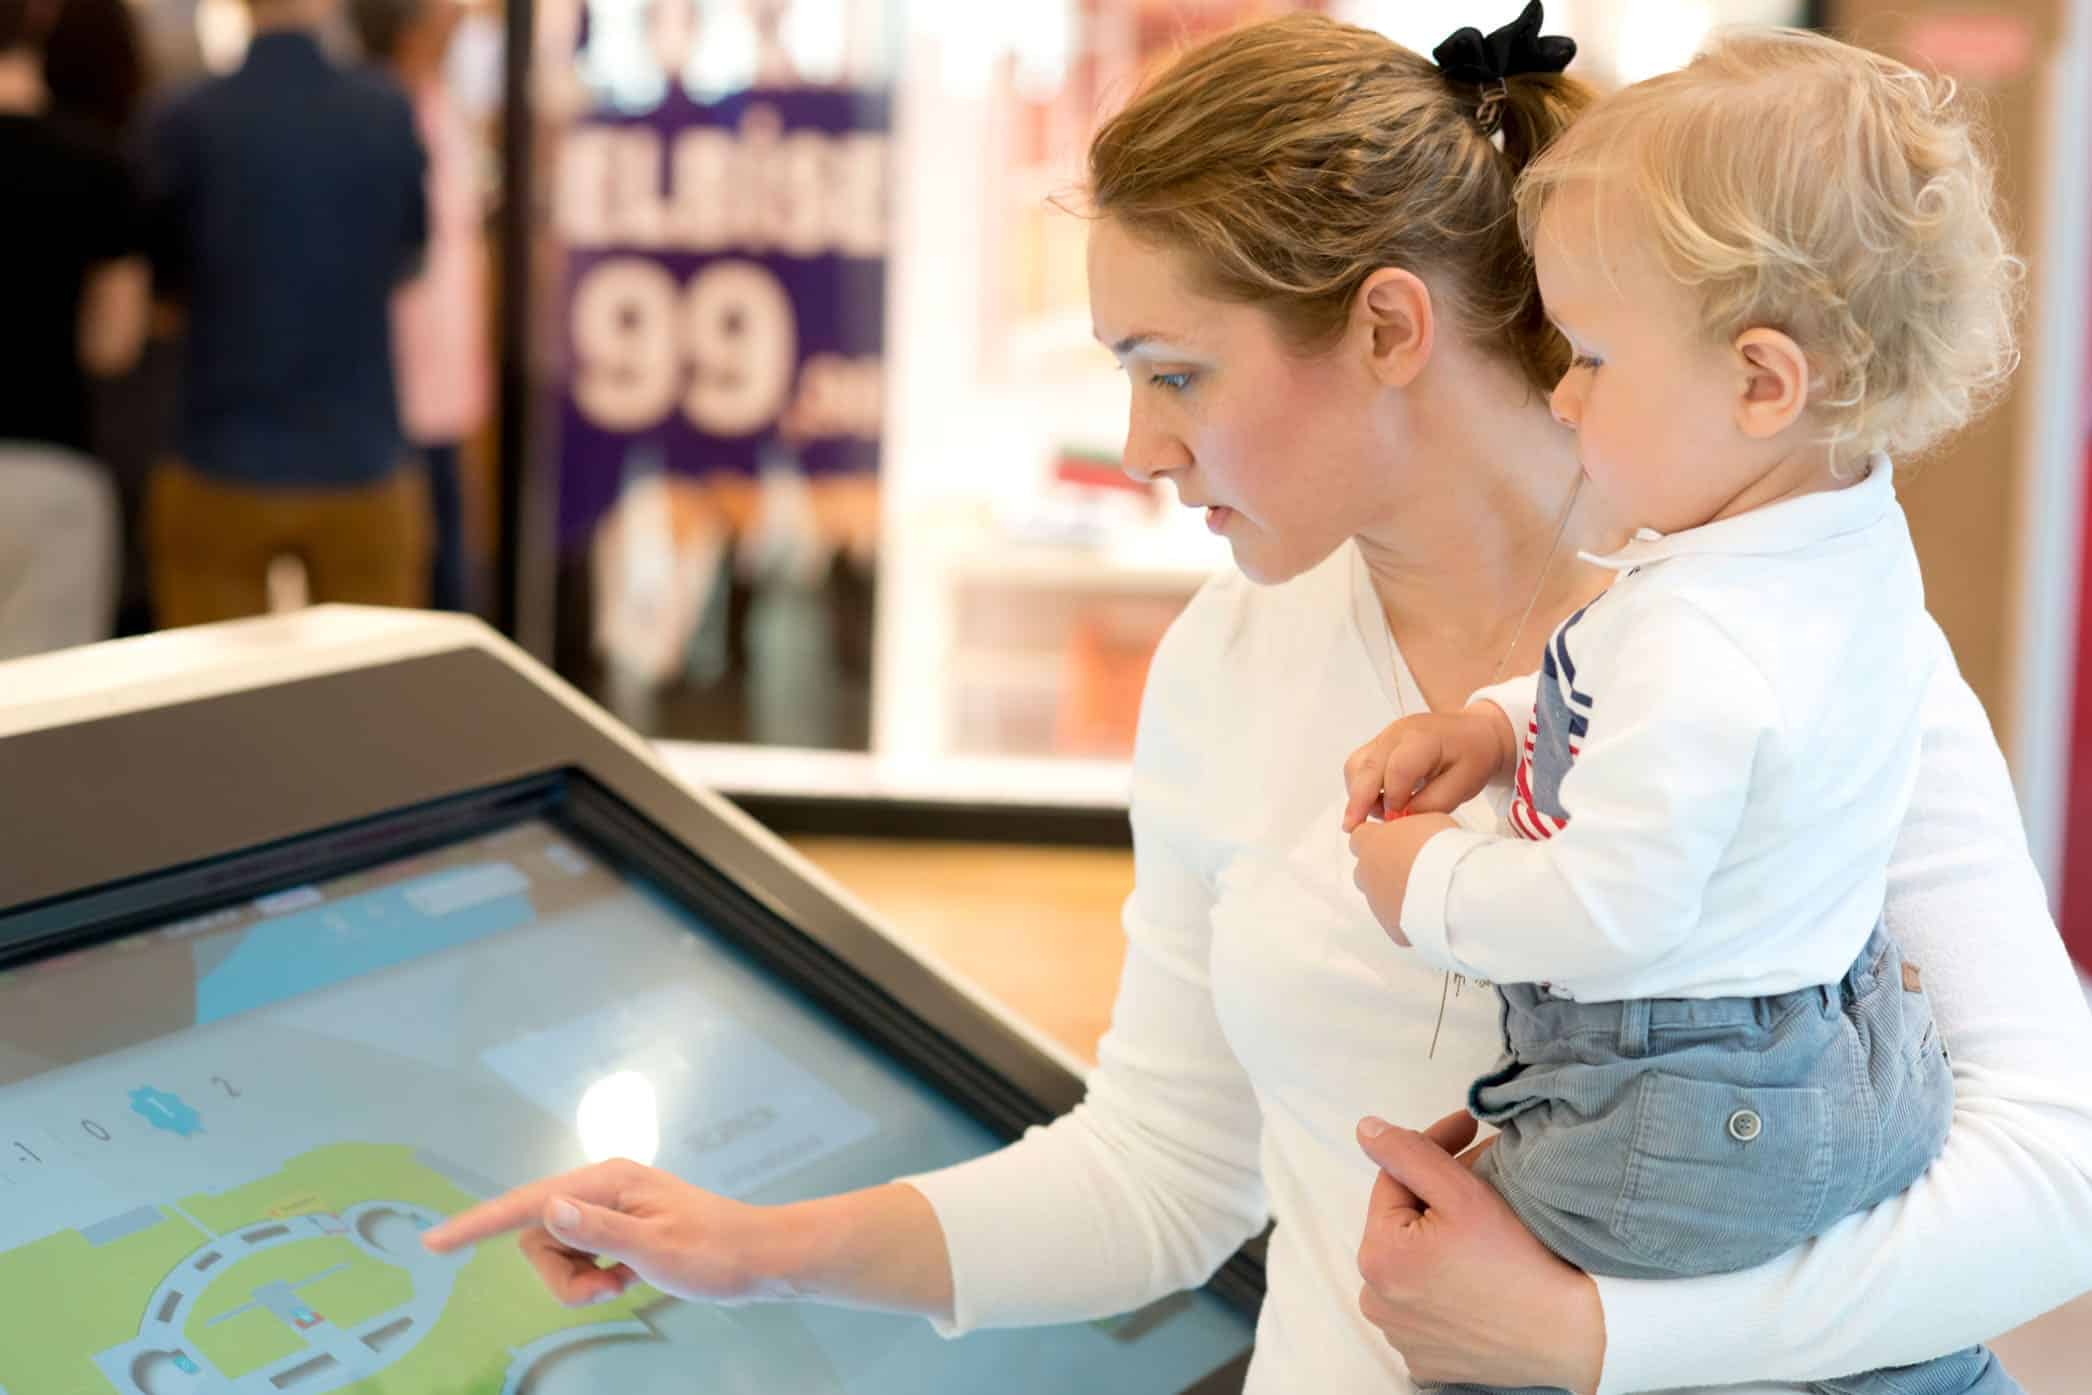 lady using an digital wayfinding kiosk while holding a young child.